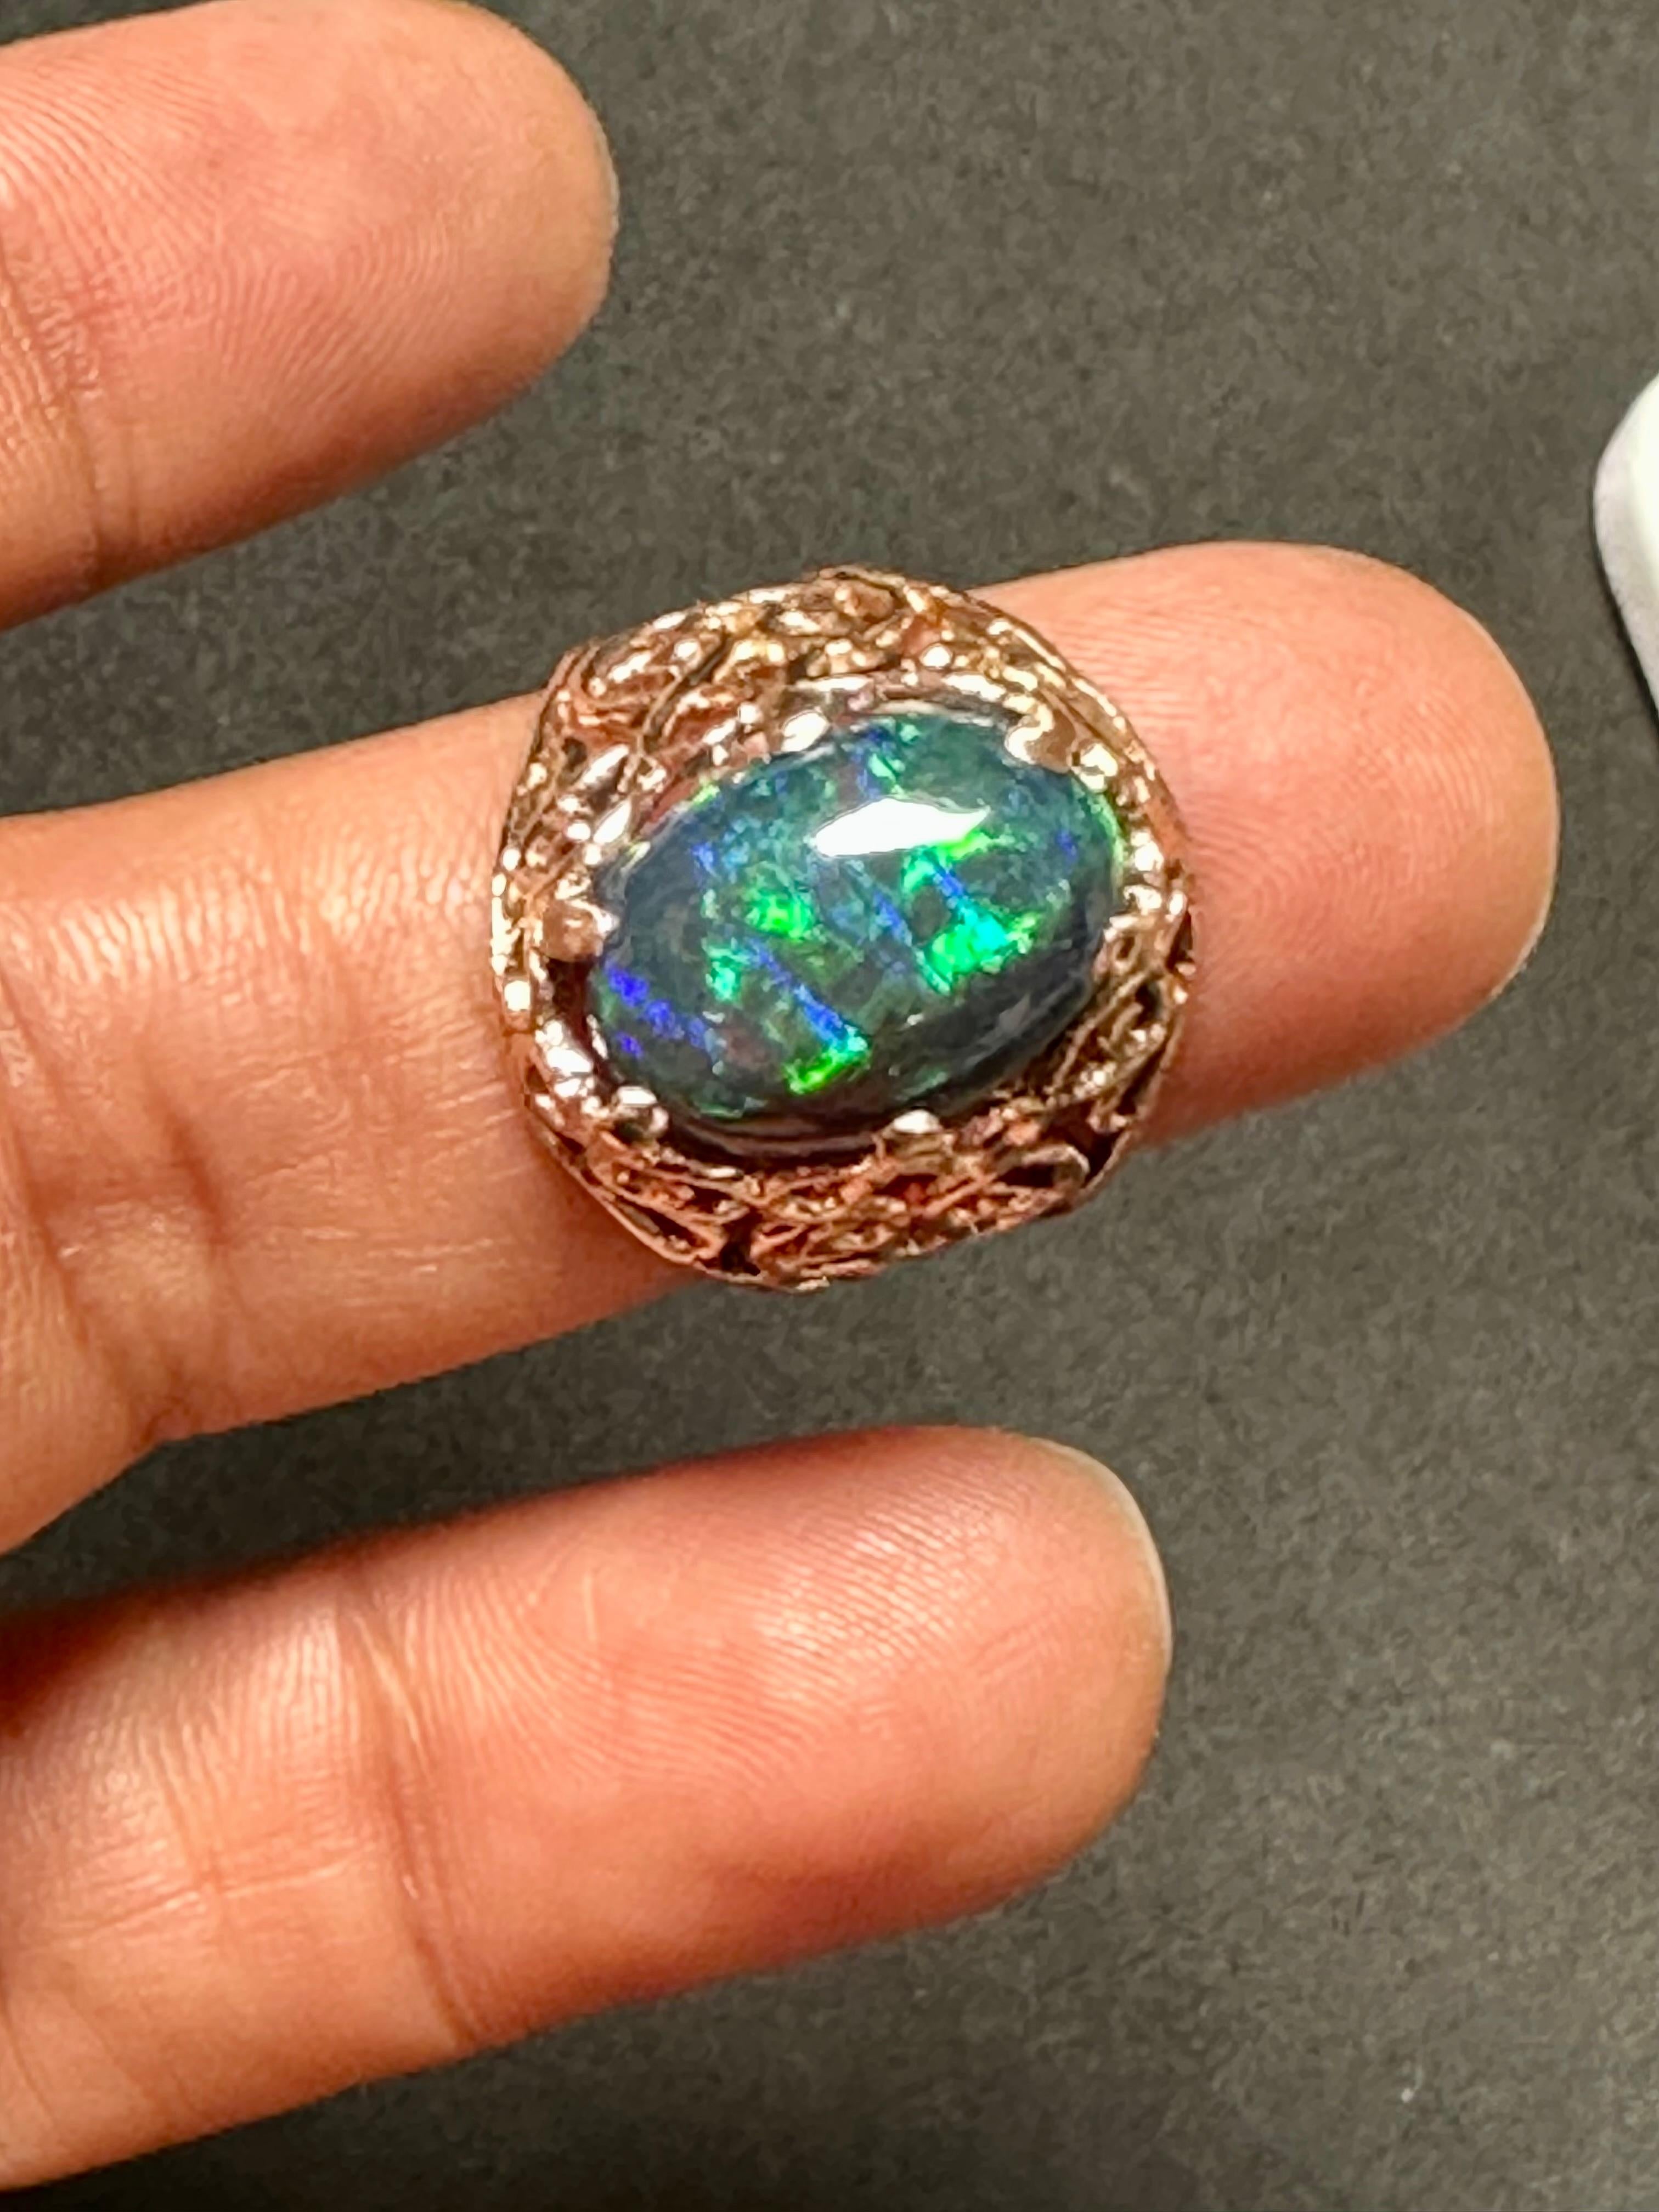 Presenting our stunning 14 Karat Yellow Gold Oval Shape Black Australian Opal Cocktail Ring, featuring an impressive 3.5 carat oval opal with magnificent shades of green, blue, and red. This exceptional ring showcases the opal's natural beauty with